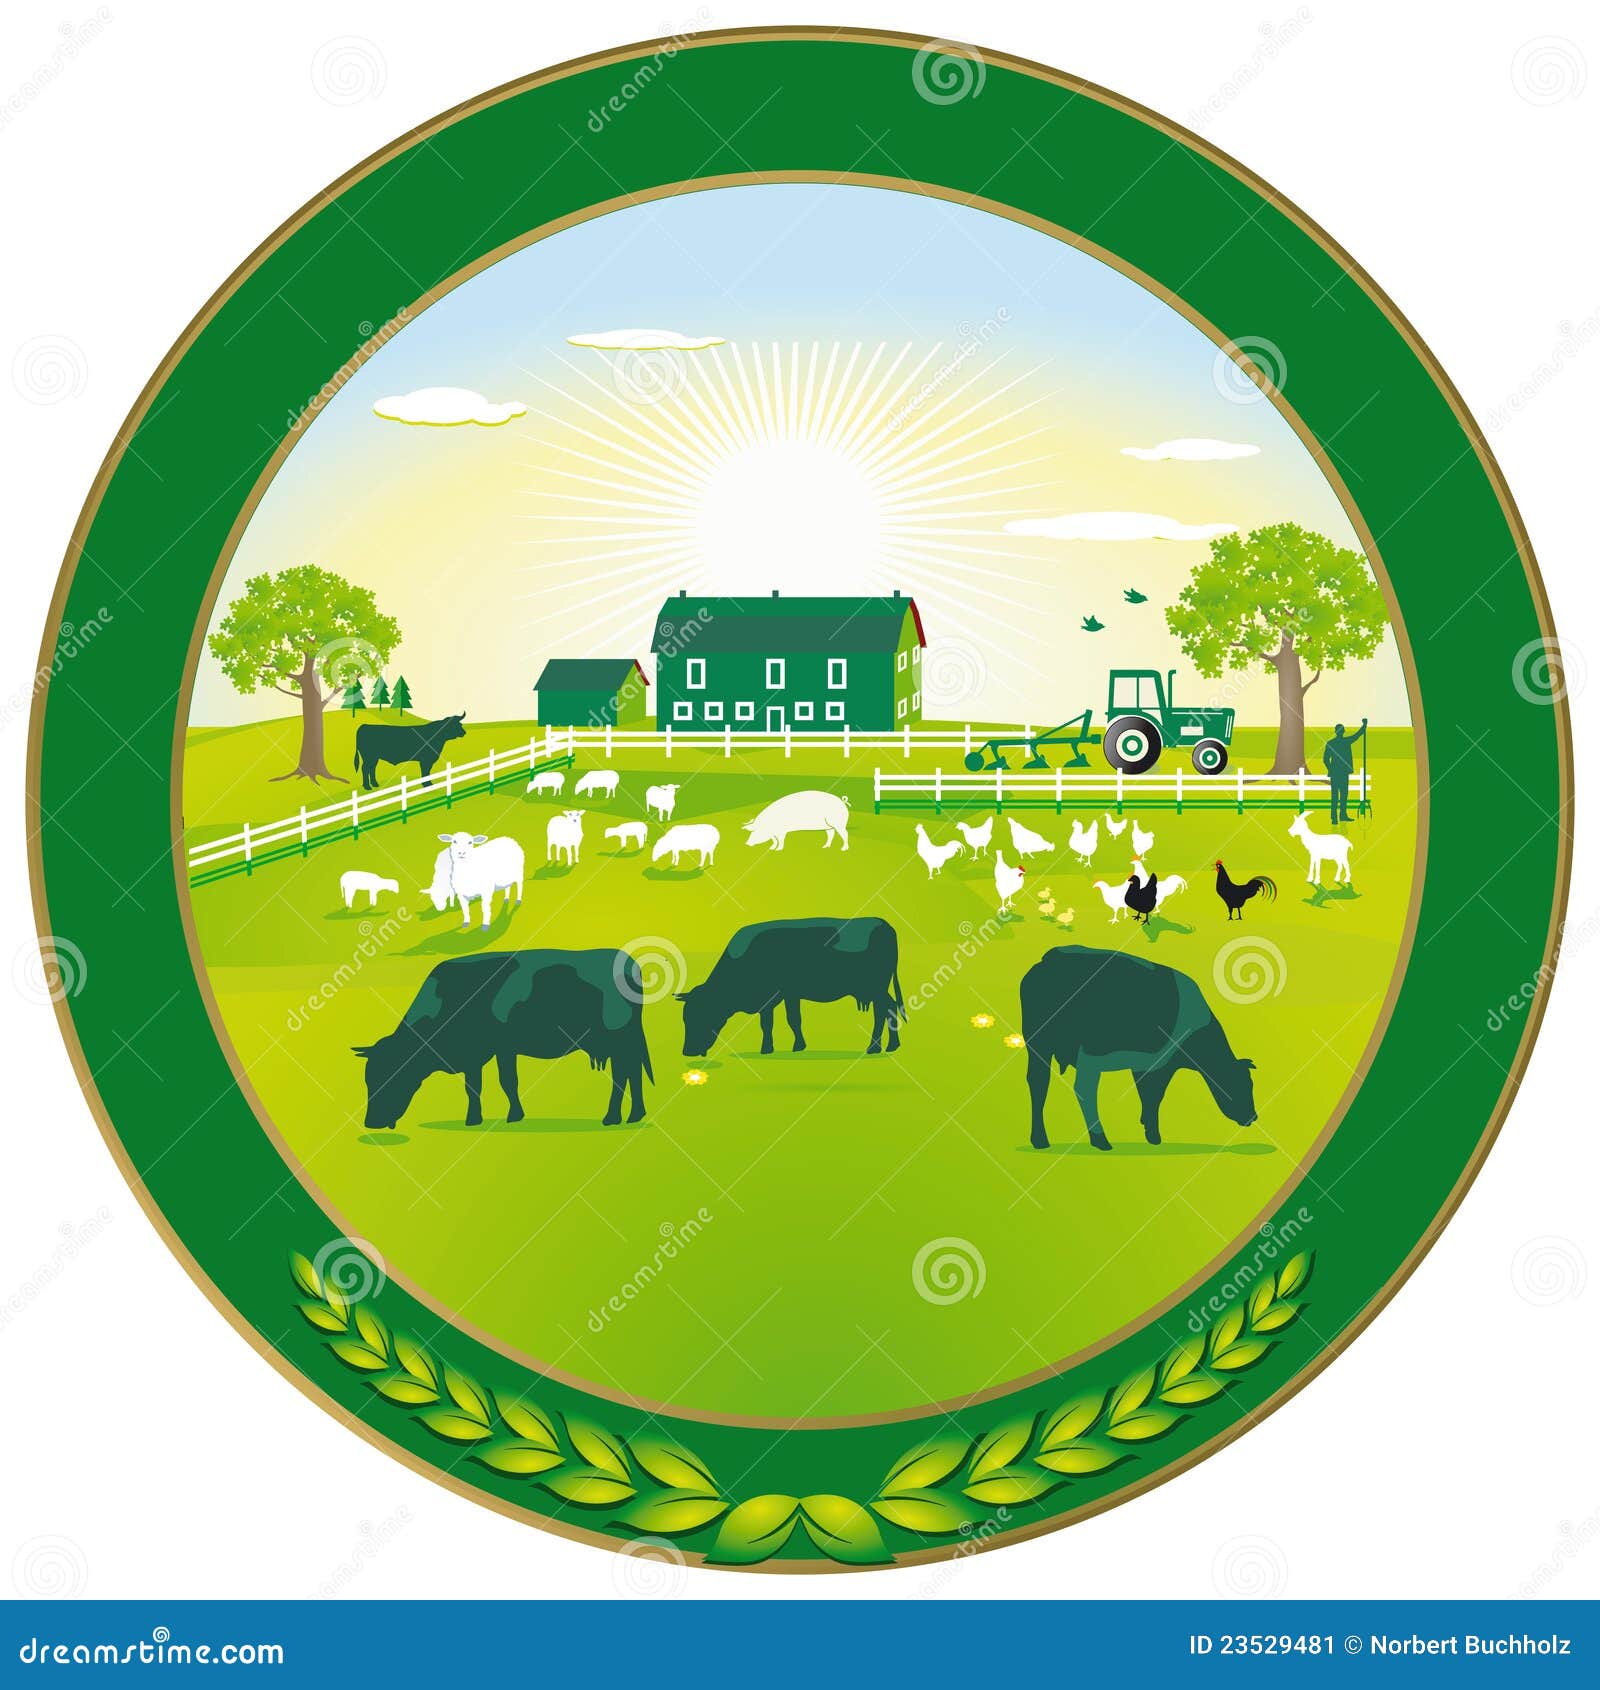 green agriculture badge